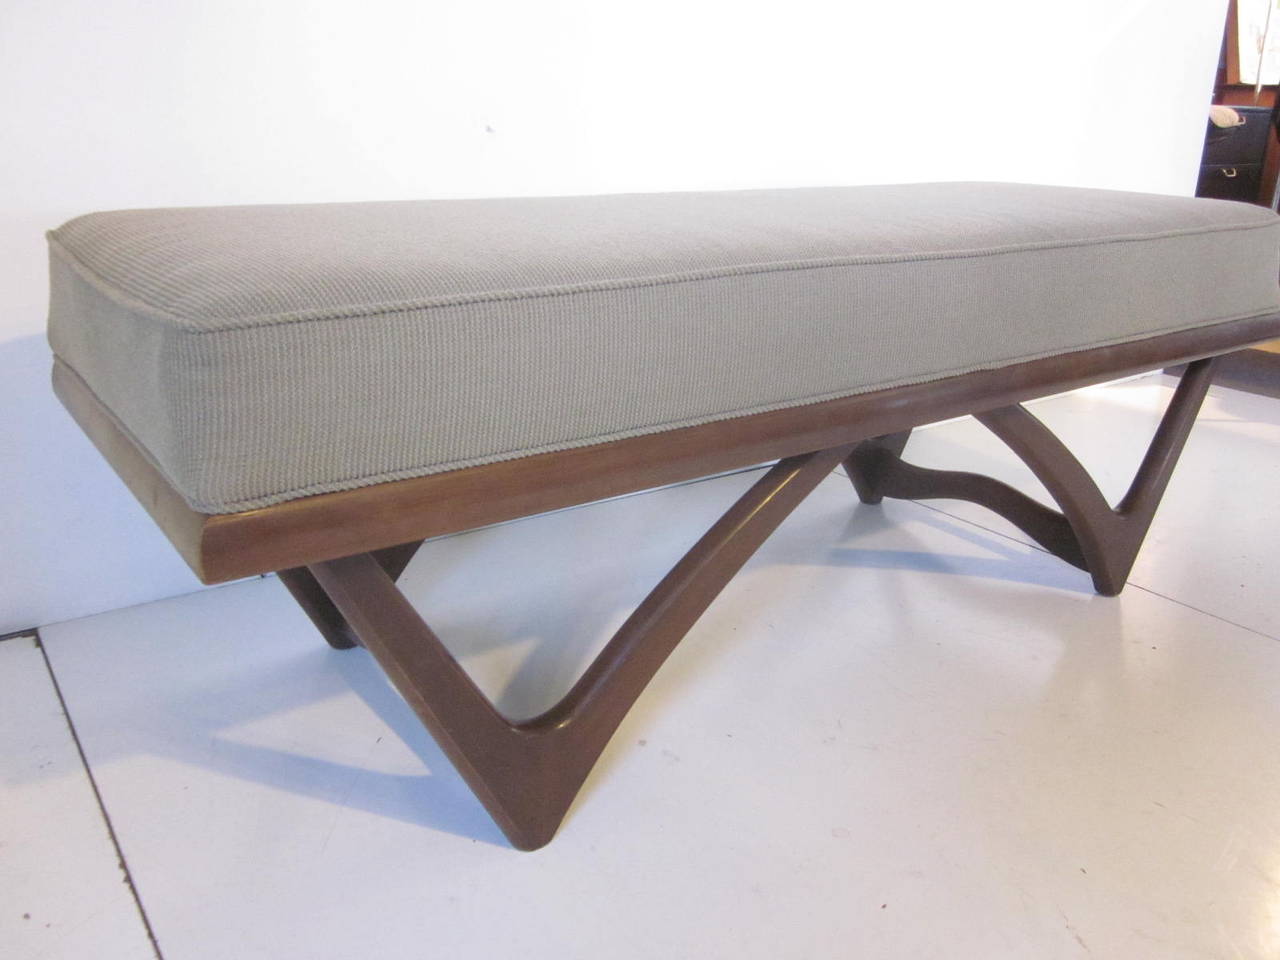 A sculptural wood based bench in the manner of Adrian Pearsall with upholstered cushion.